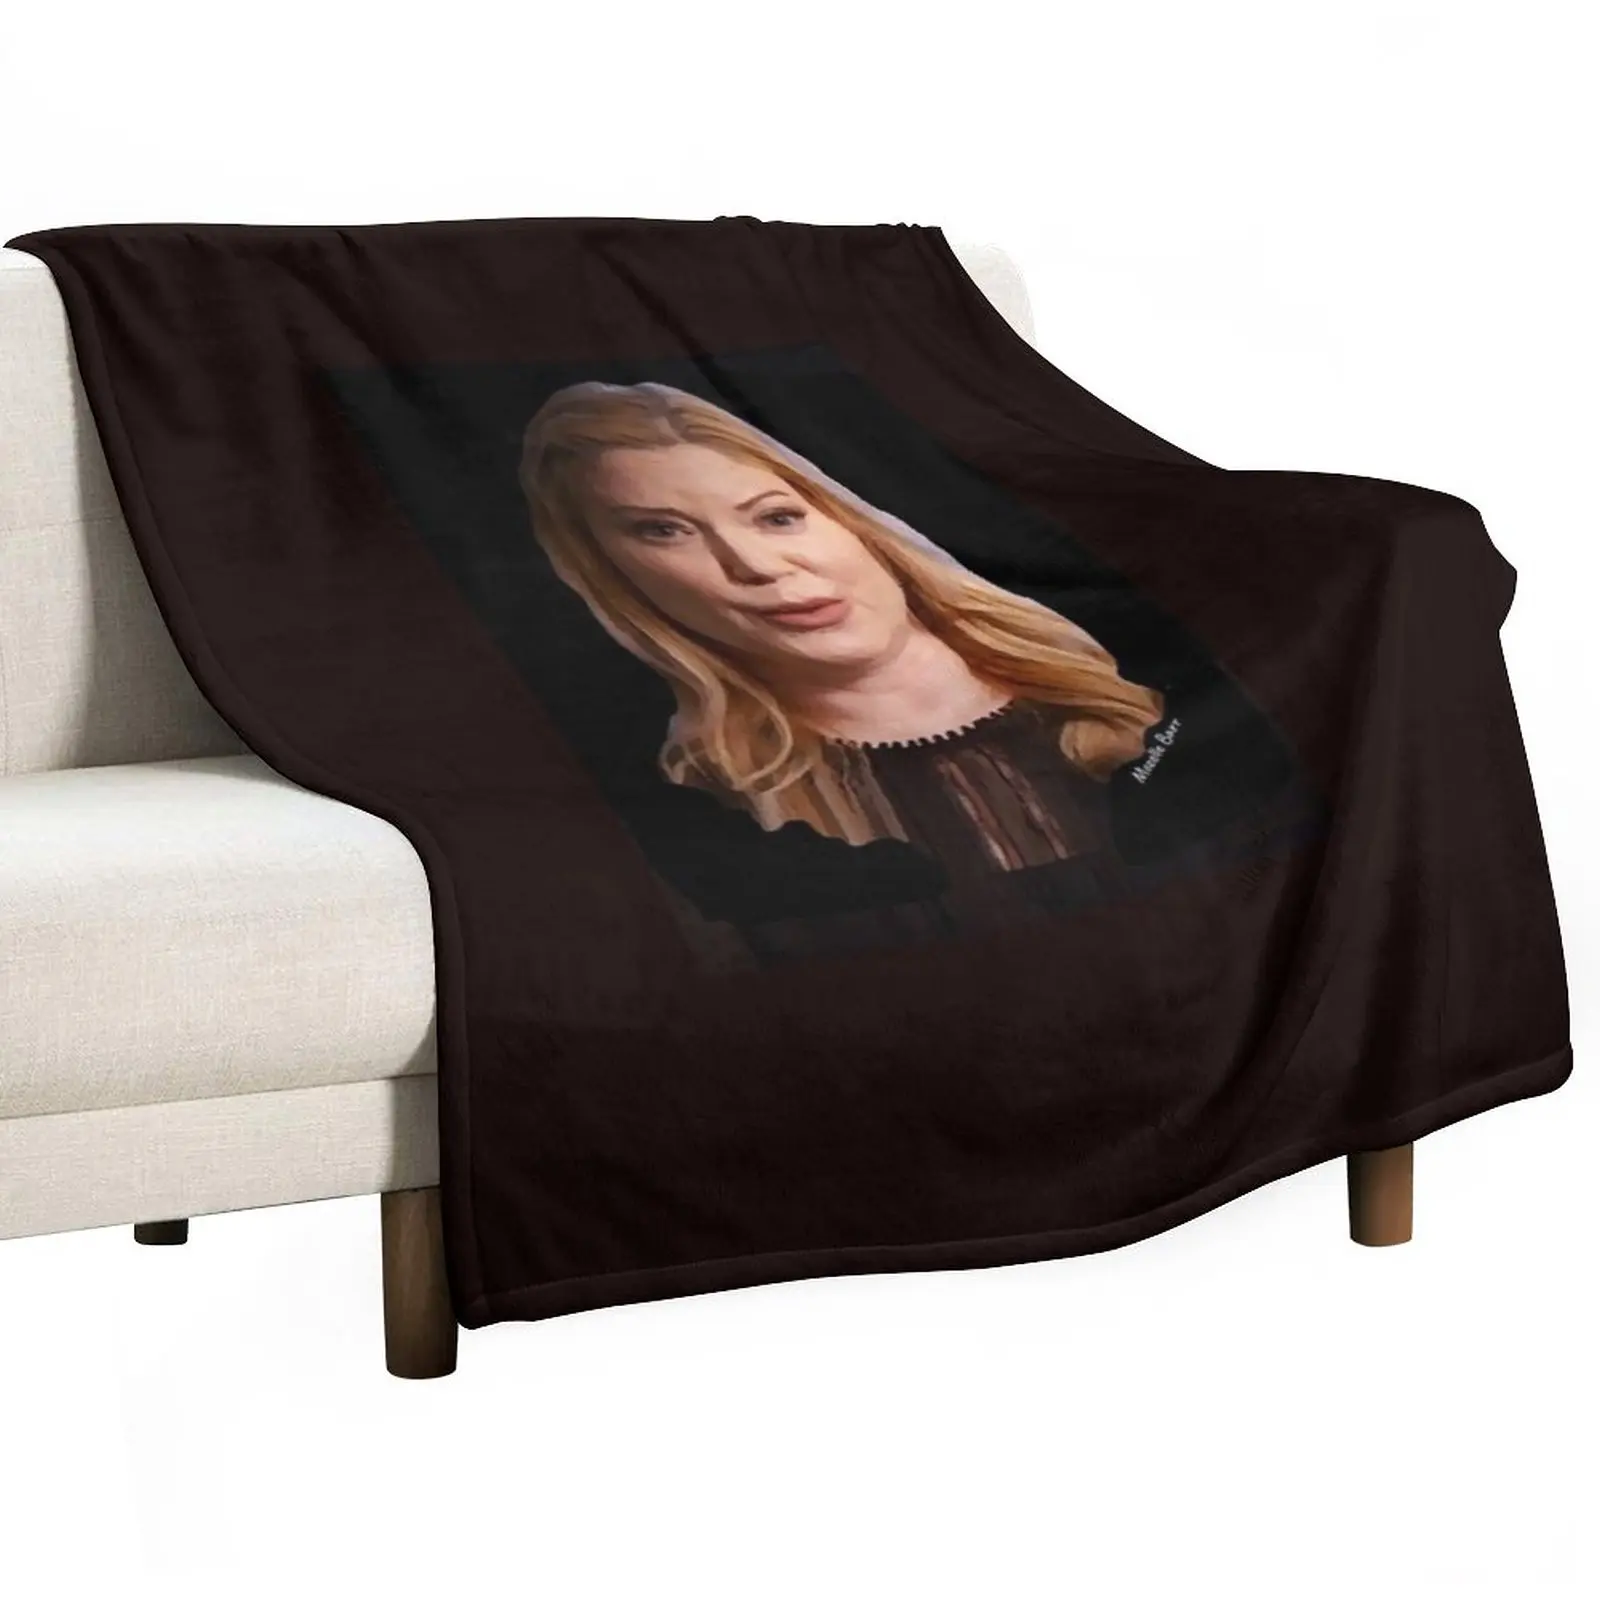 

Amy Allan of The Dead Files Show Throw Blanket bed plaid Blanket For Decorative Sofa